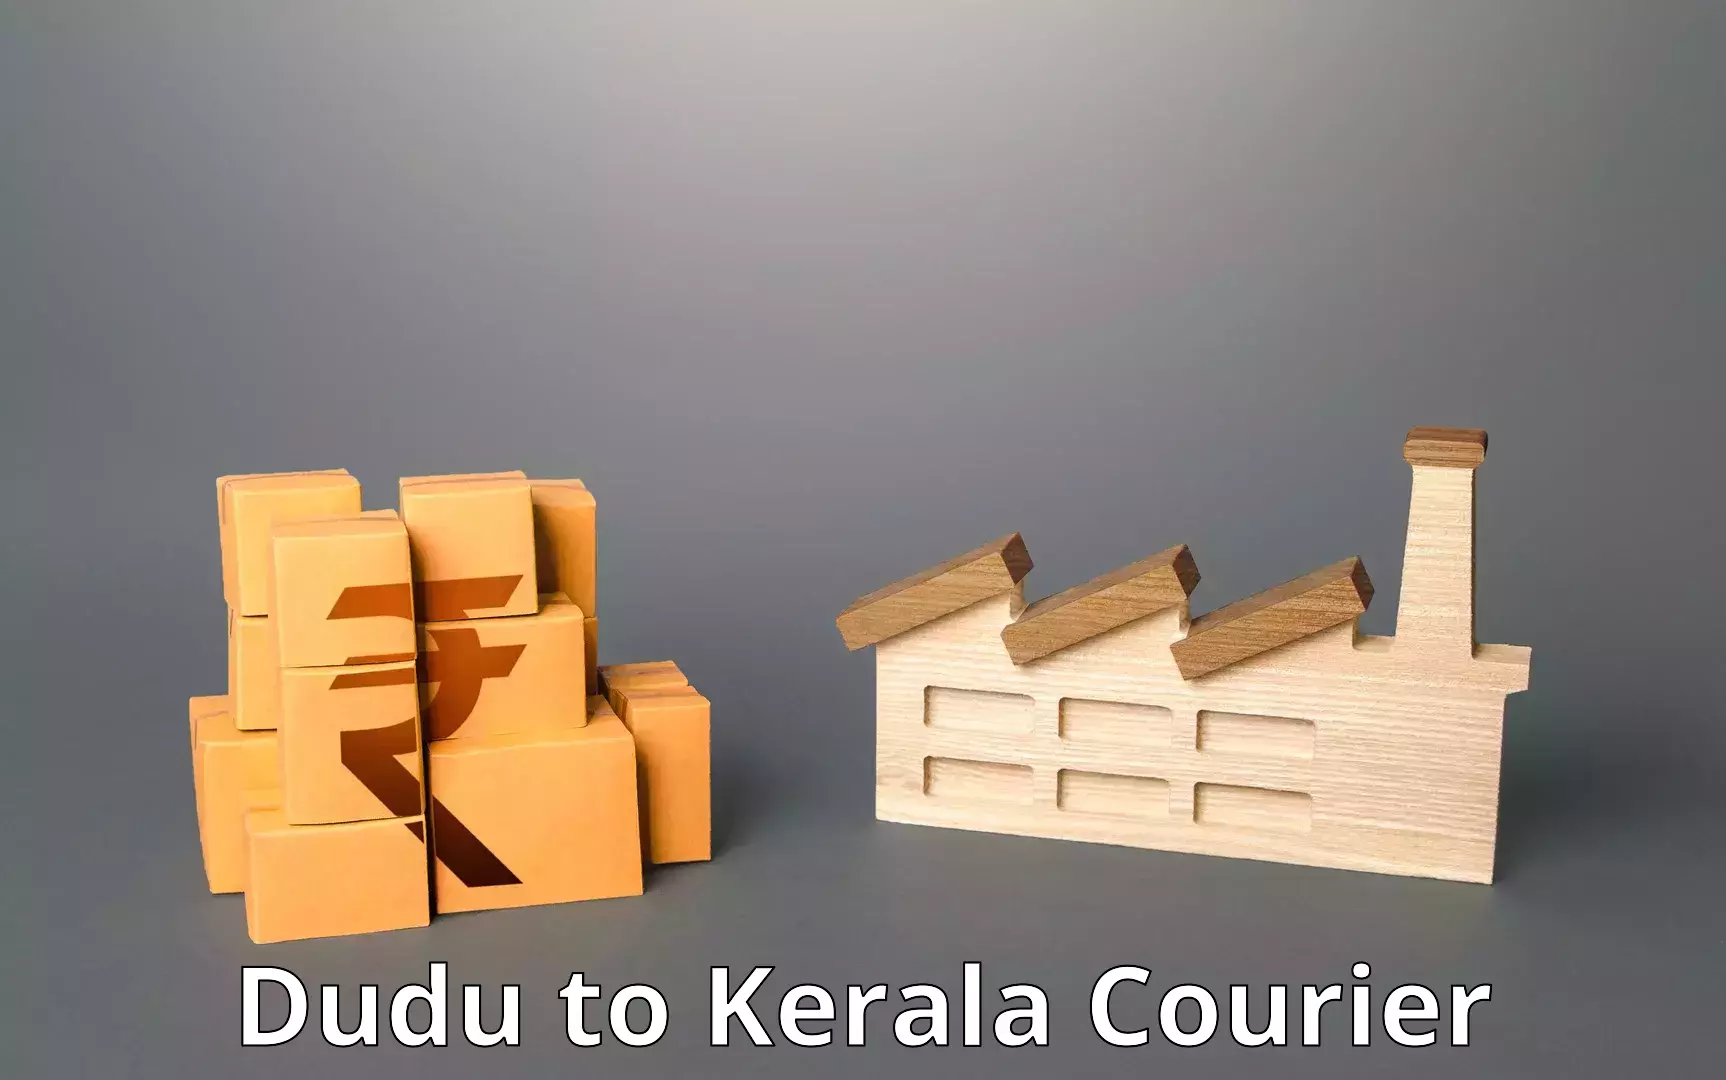 Express delivery capabilities Dudu to Kodungallur